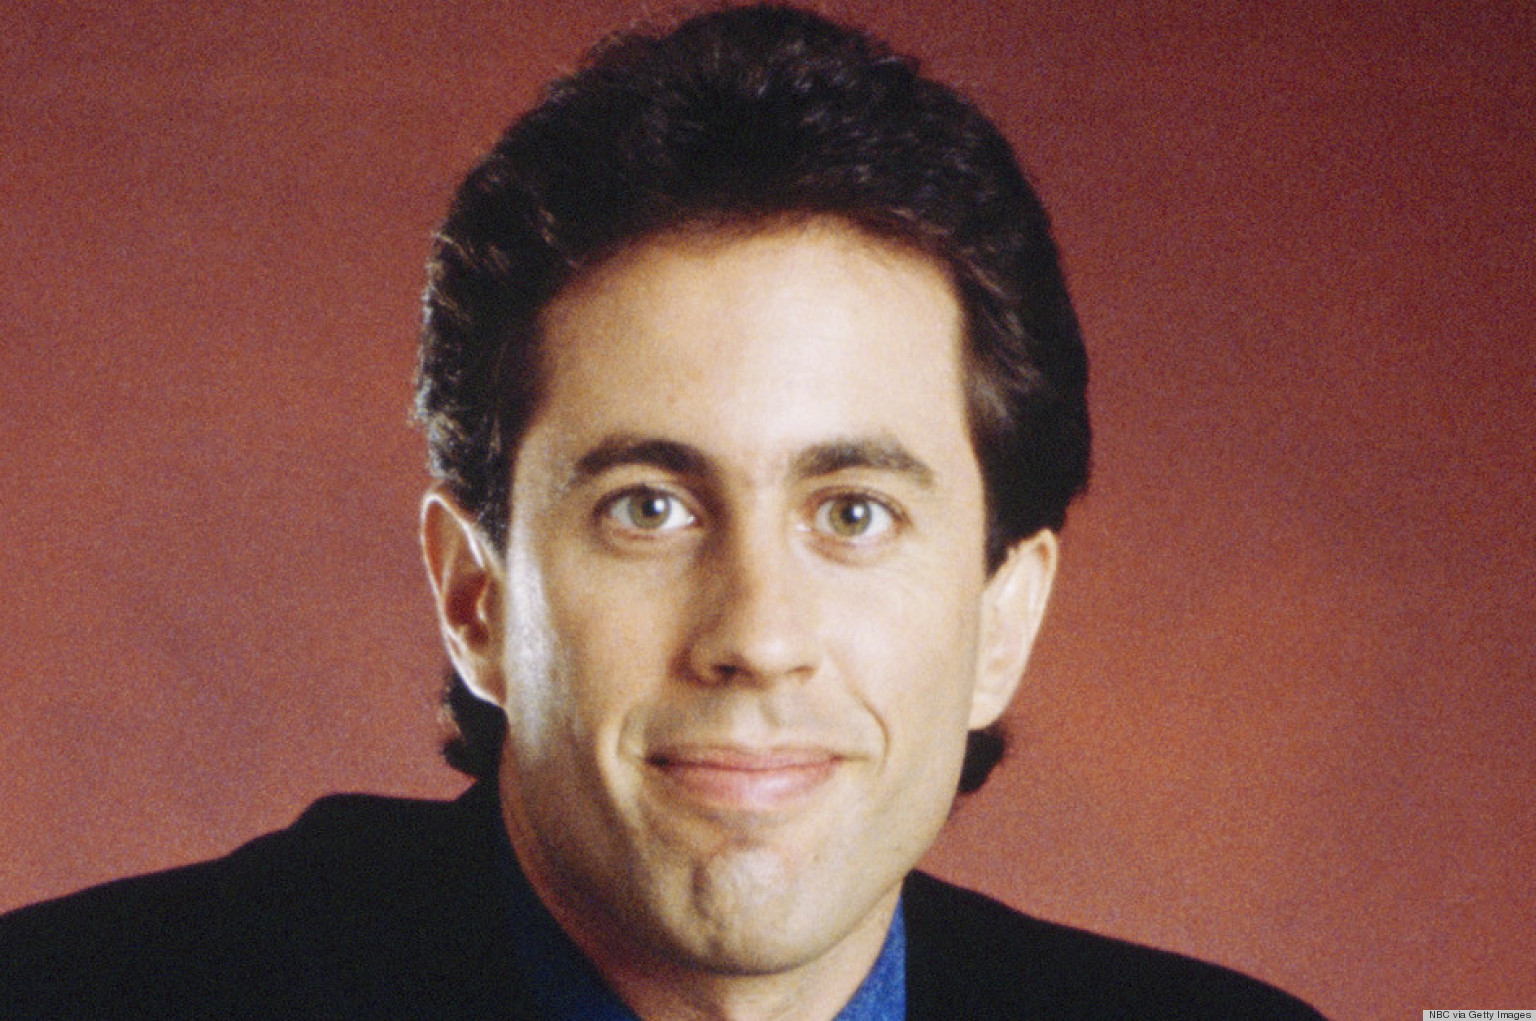 Jerry Seinfeld, Comedian, Back When He Wore Mom Jeans And White Sneakers (PHOTO)1536 x 1021